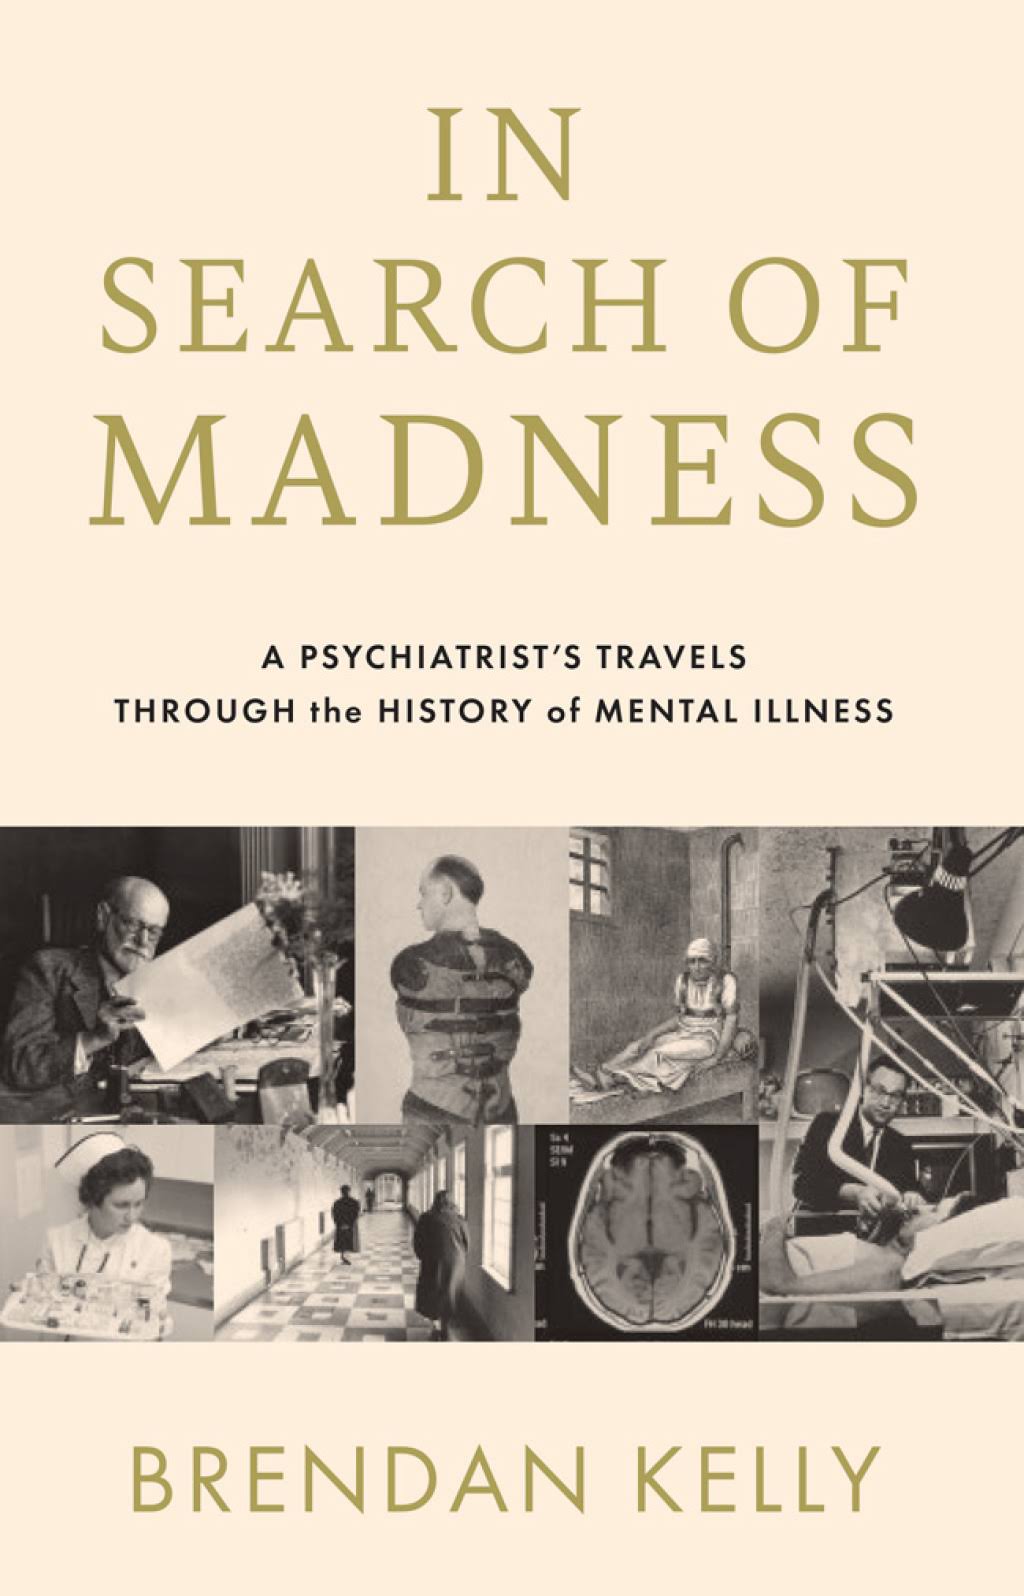 In Search of Madness by Brendan Kelly